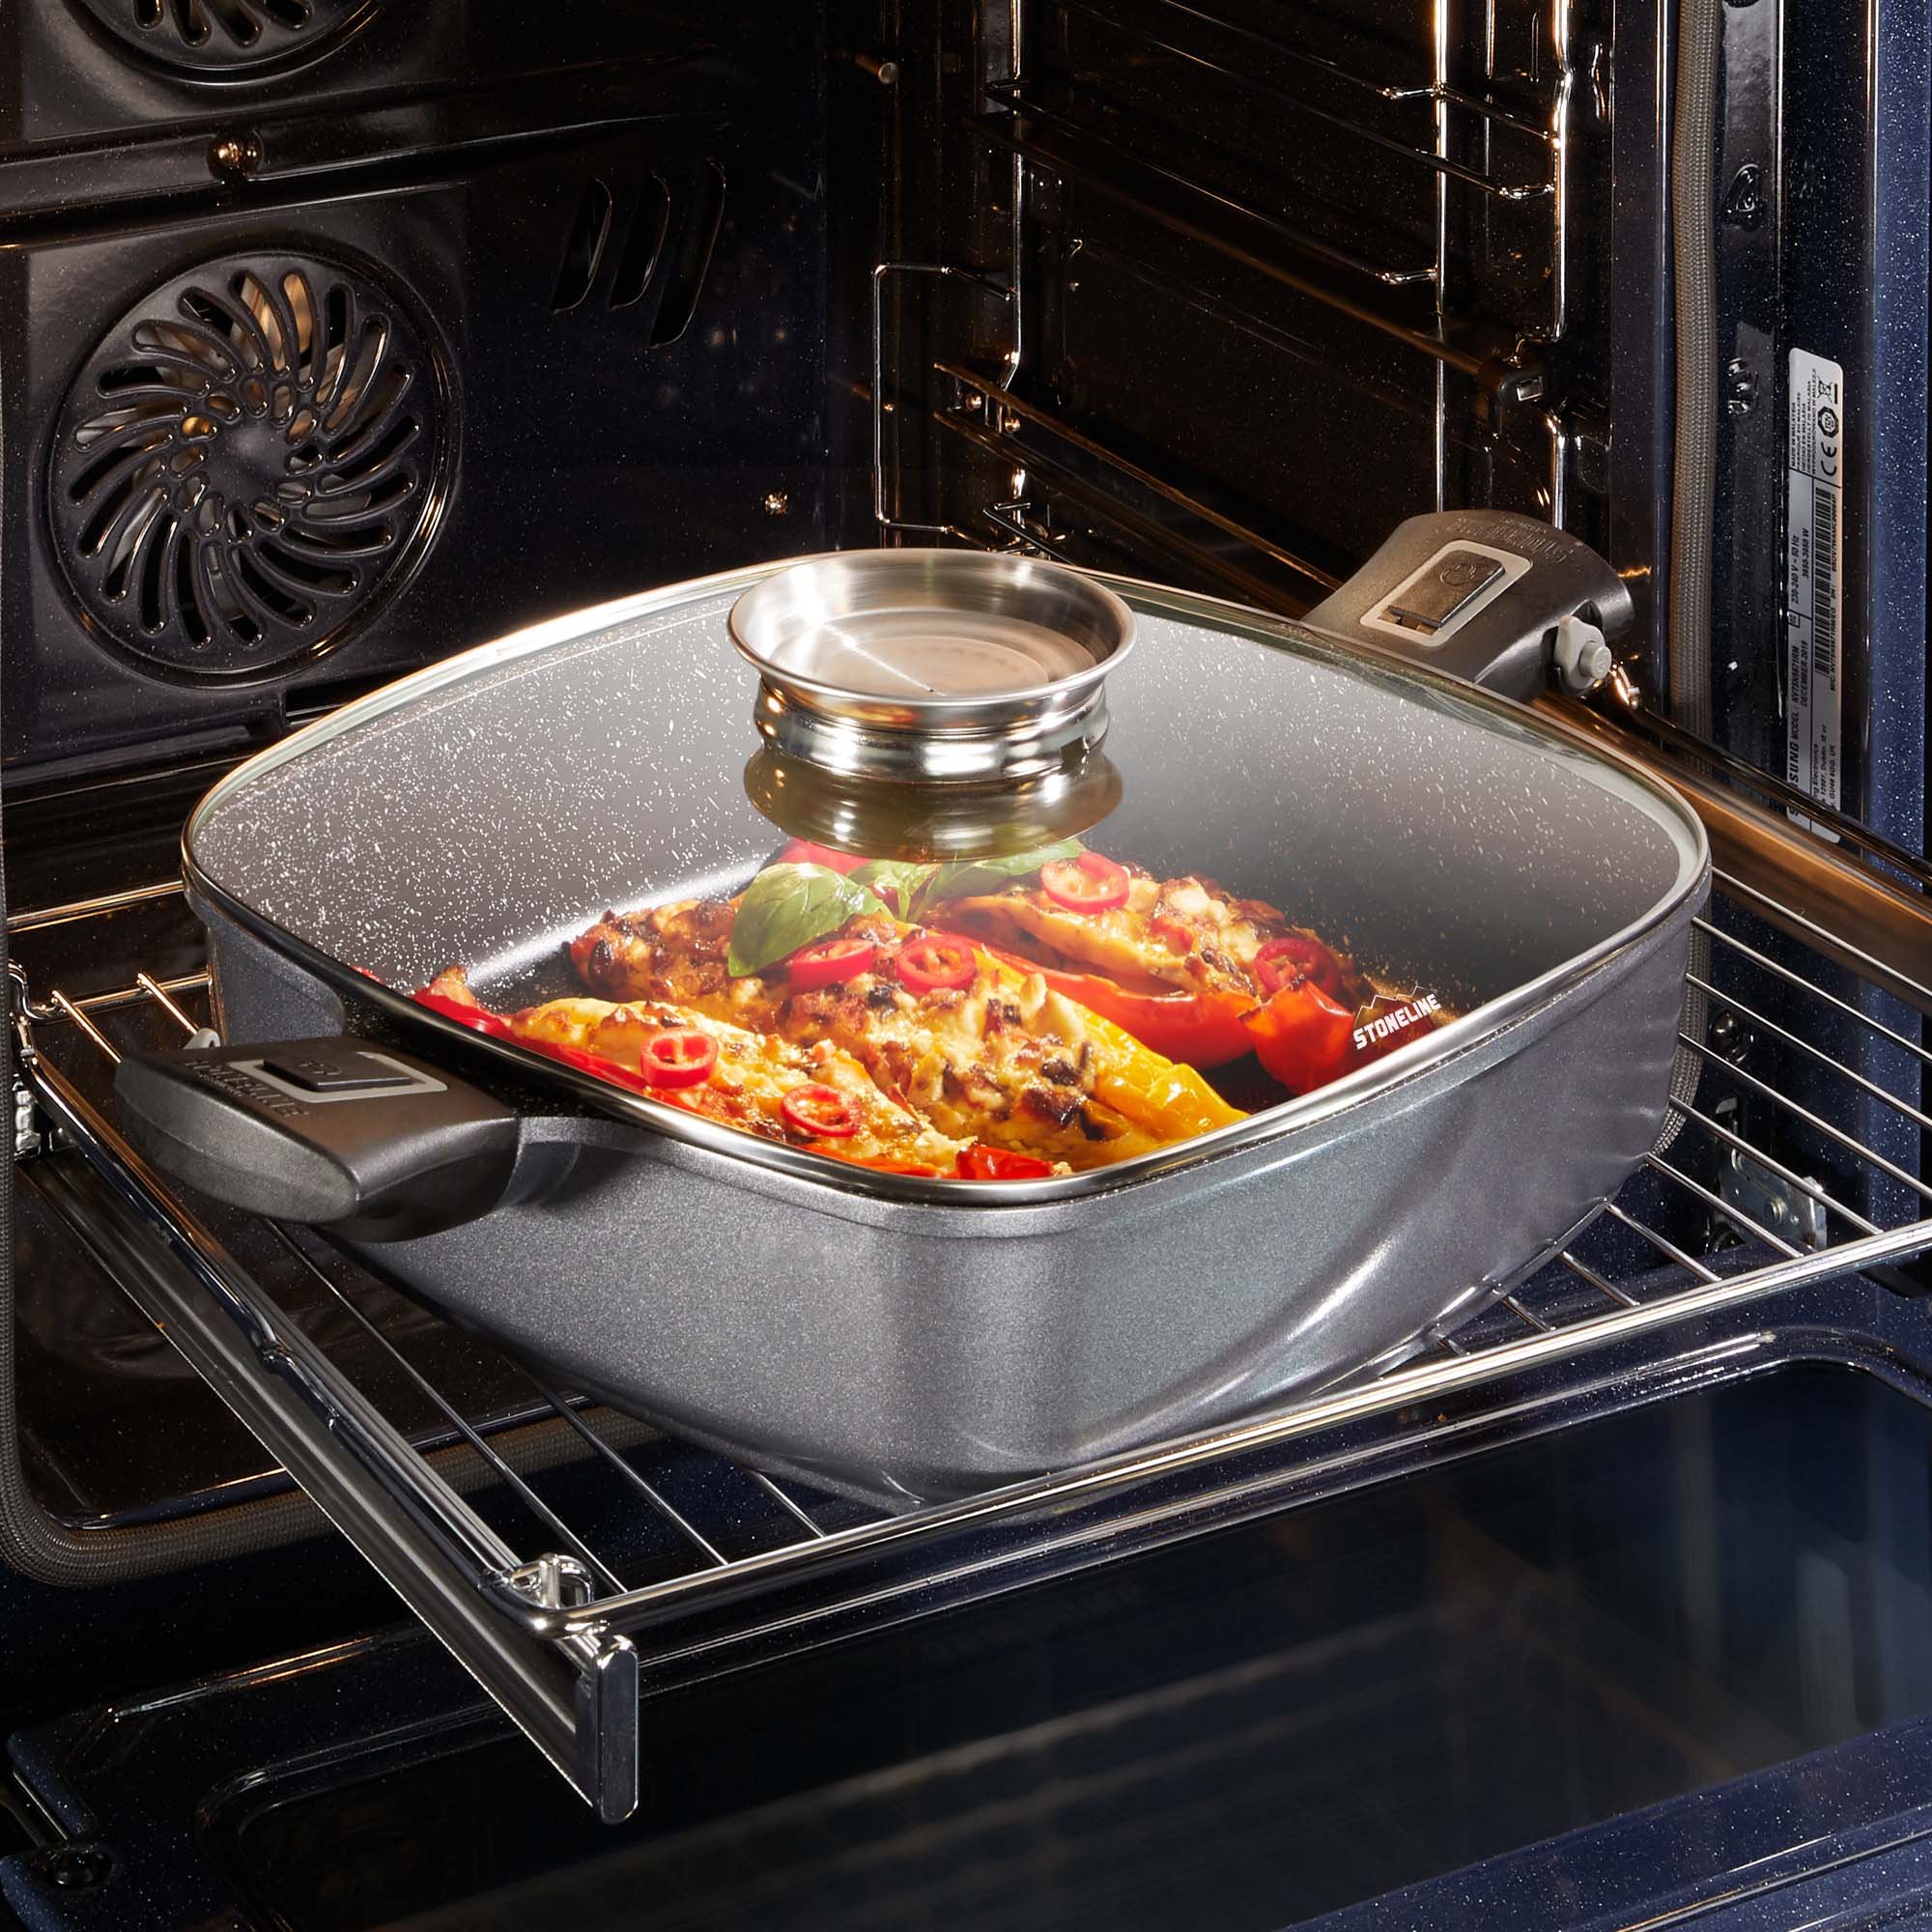 STONELINE® Imagination PLUS corner pan Serving pan 28 x 28 cm, corner pan with removable handles, with aroma glass lid